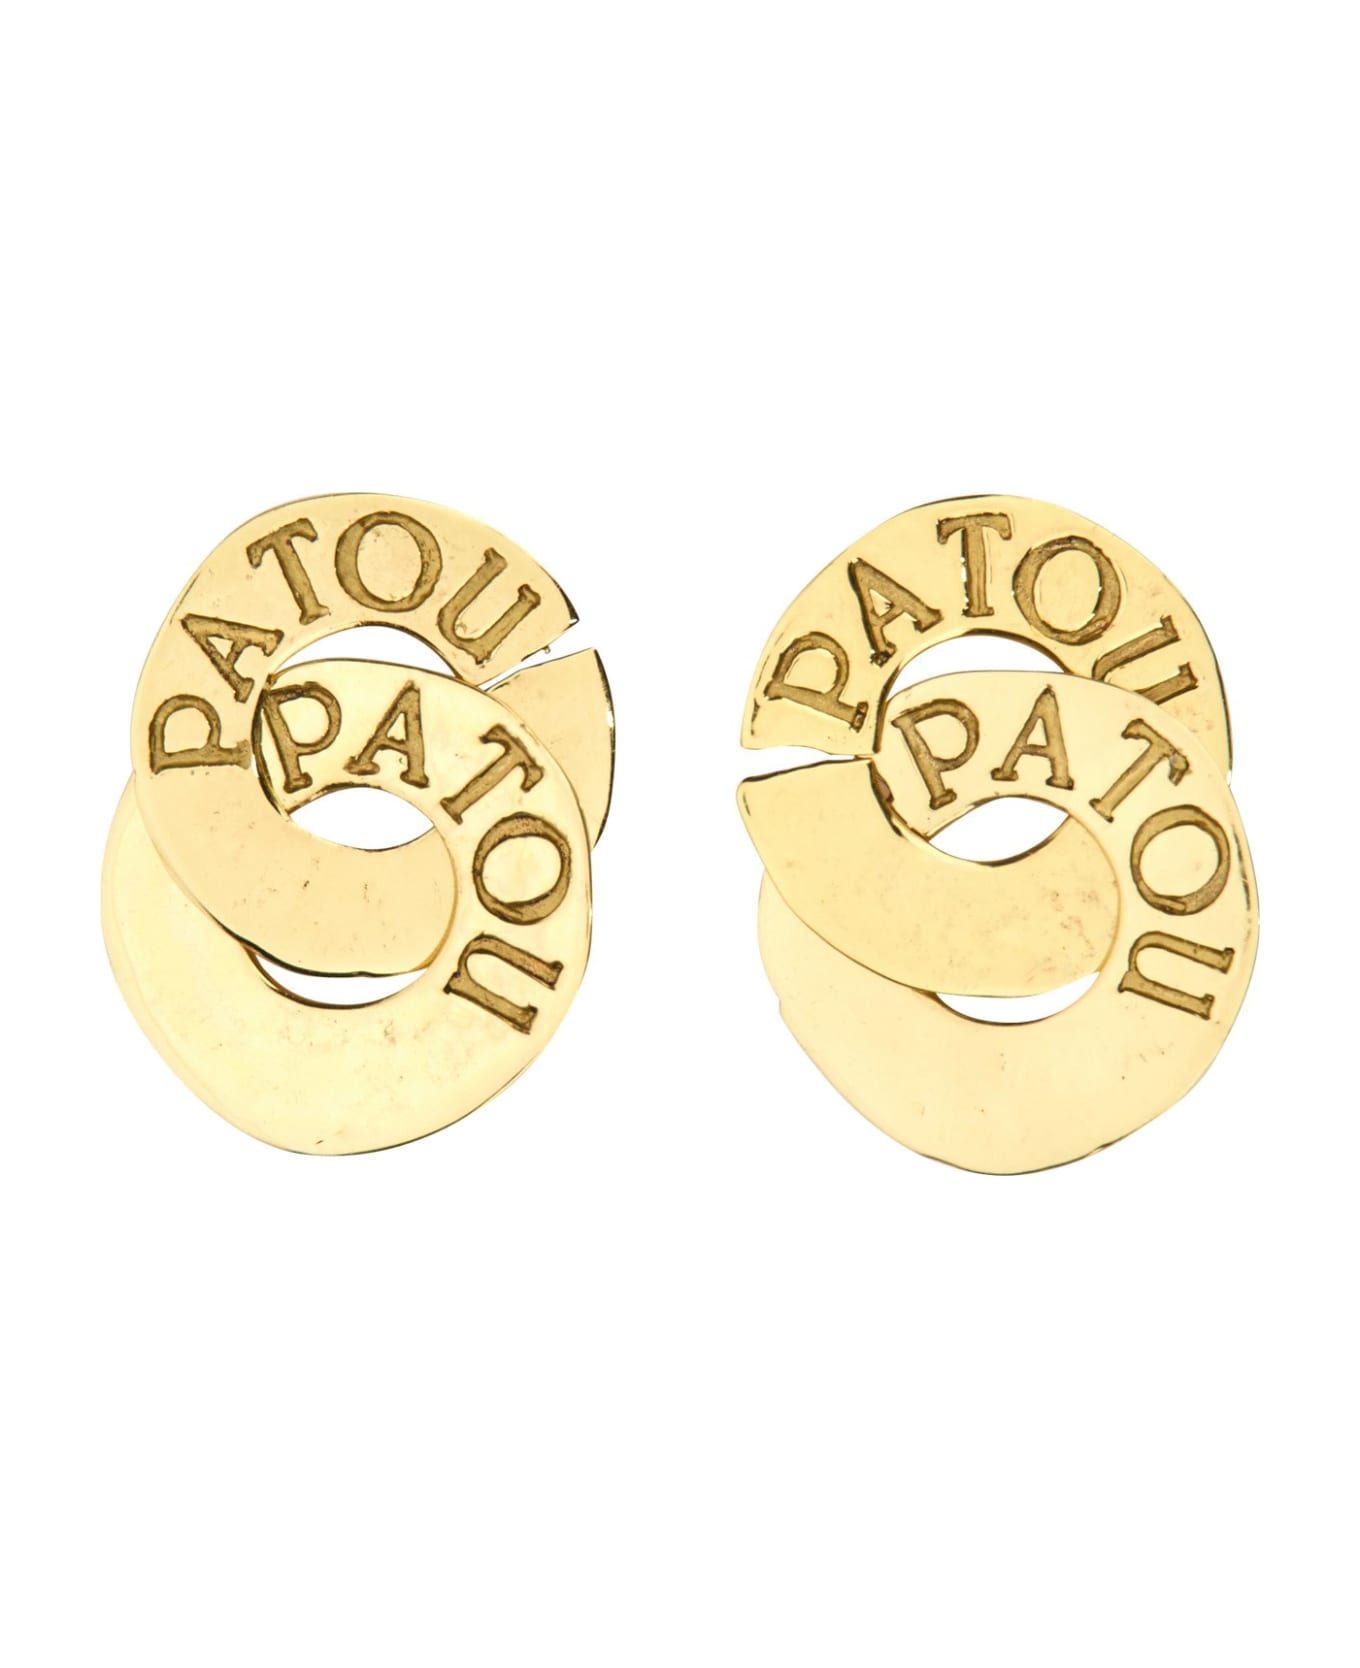 Patou Double Coin Earrings - G Gold イヤリング